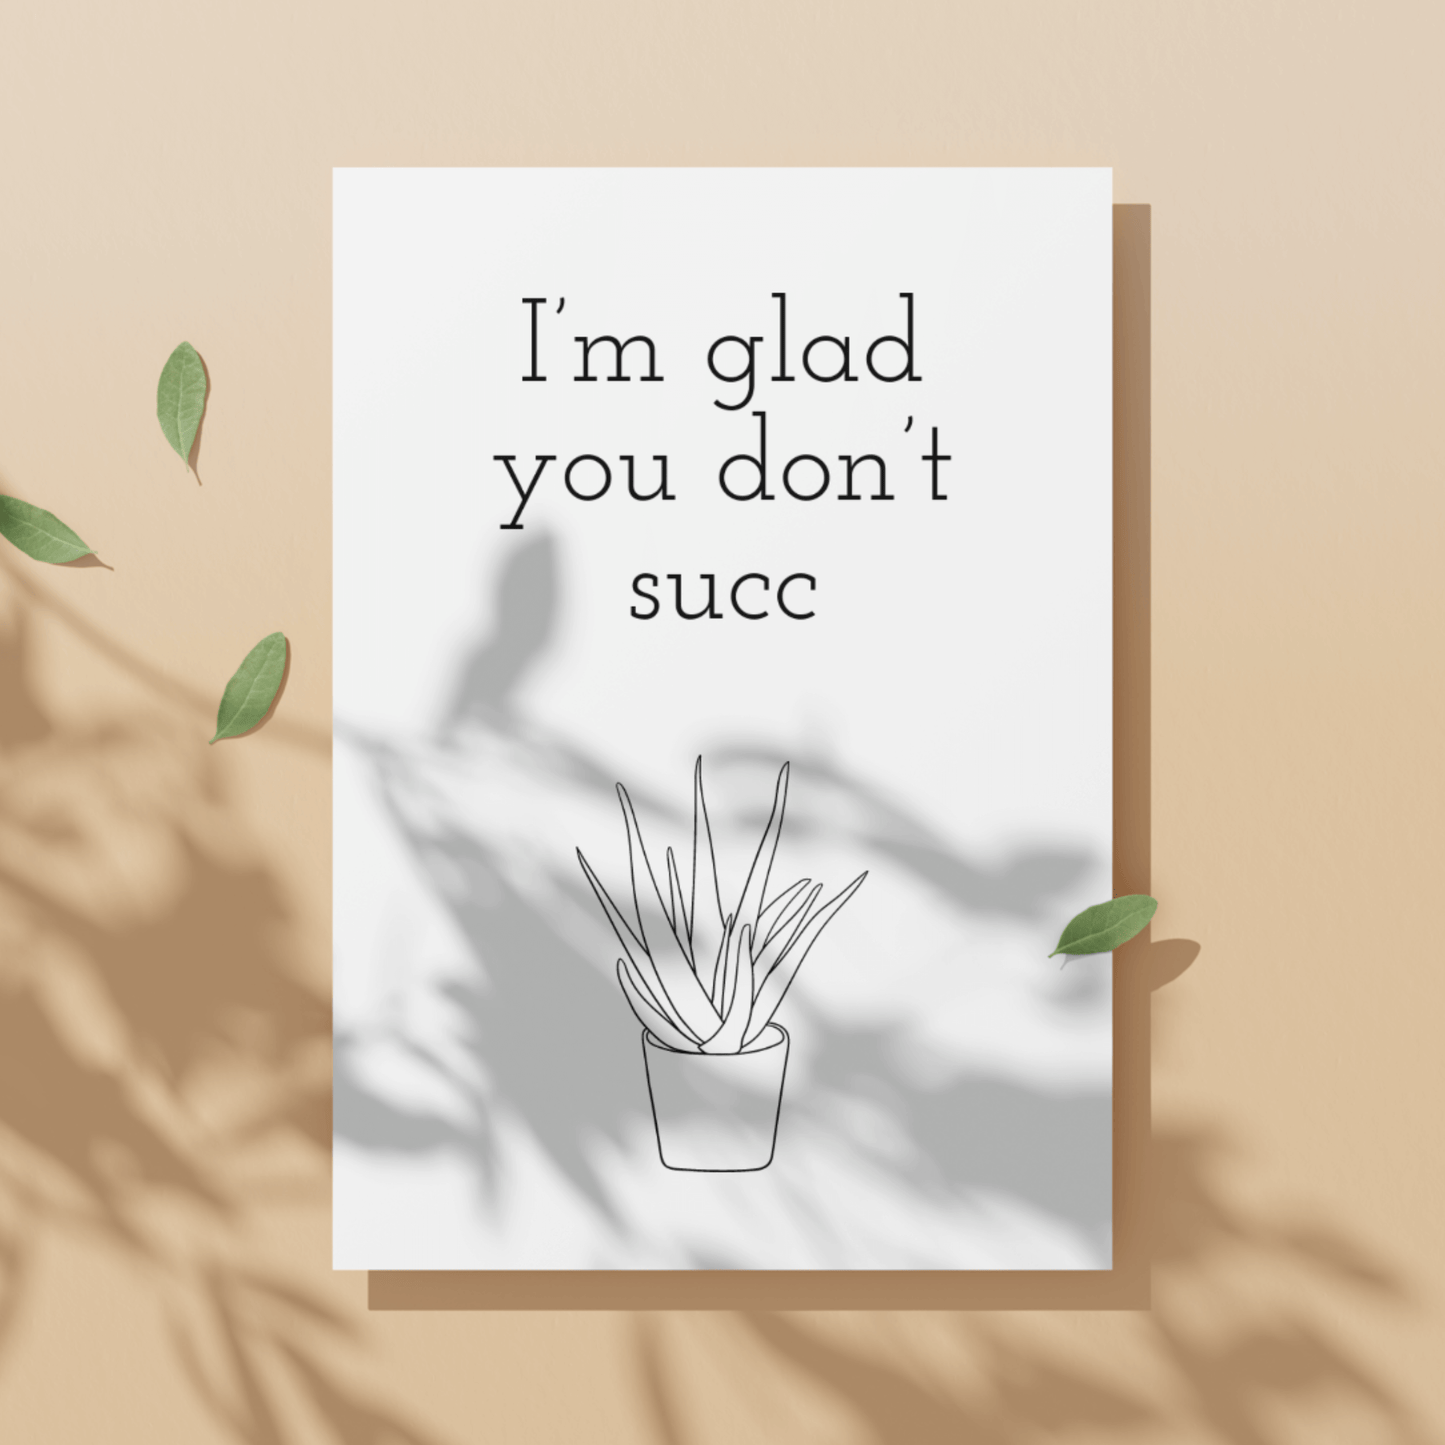 Little Kraken's I'm Glad You Don't Succ | Funny Love Anniversary Card | Funny Aloe Vera Love Card, Love Cards for £3.50 each